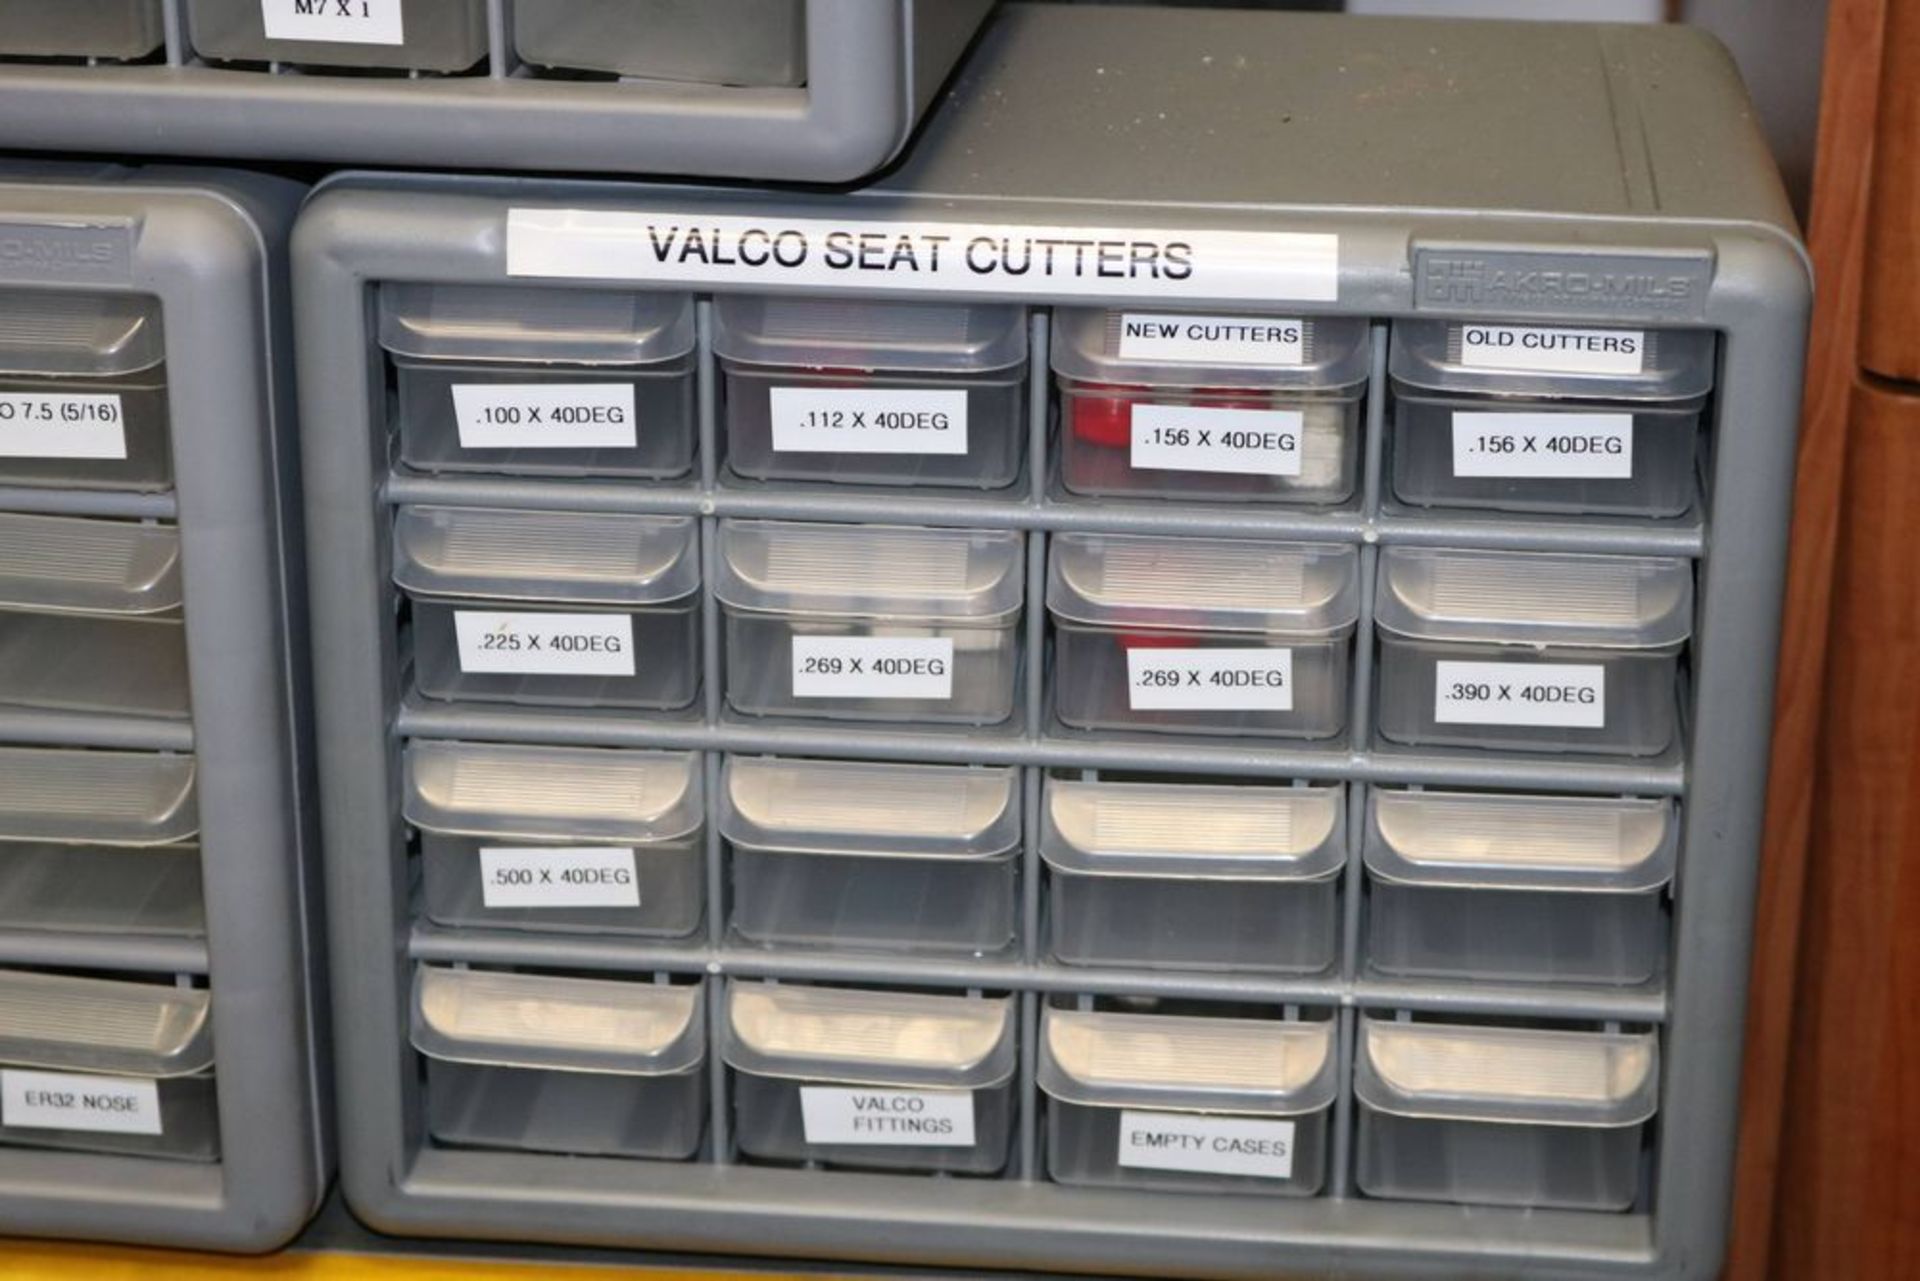 Tool Organizers with Valco Seat Cutters, Oversized Thread Mills and Inserts, Taps, Rego-fix - Image 5 of 9